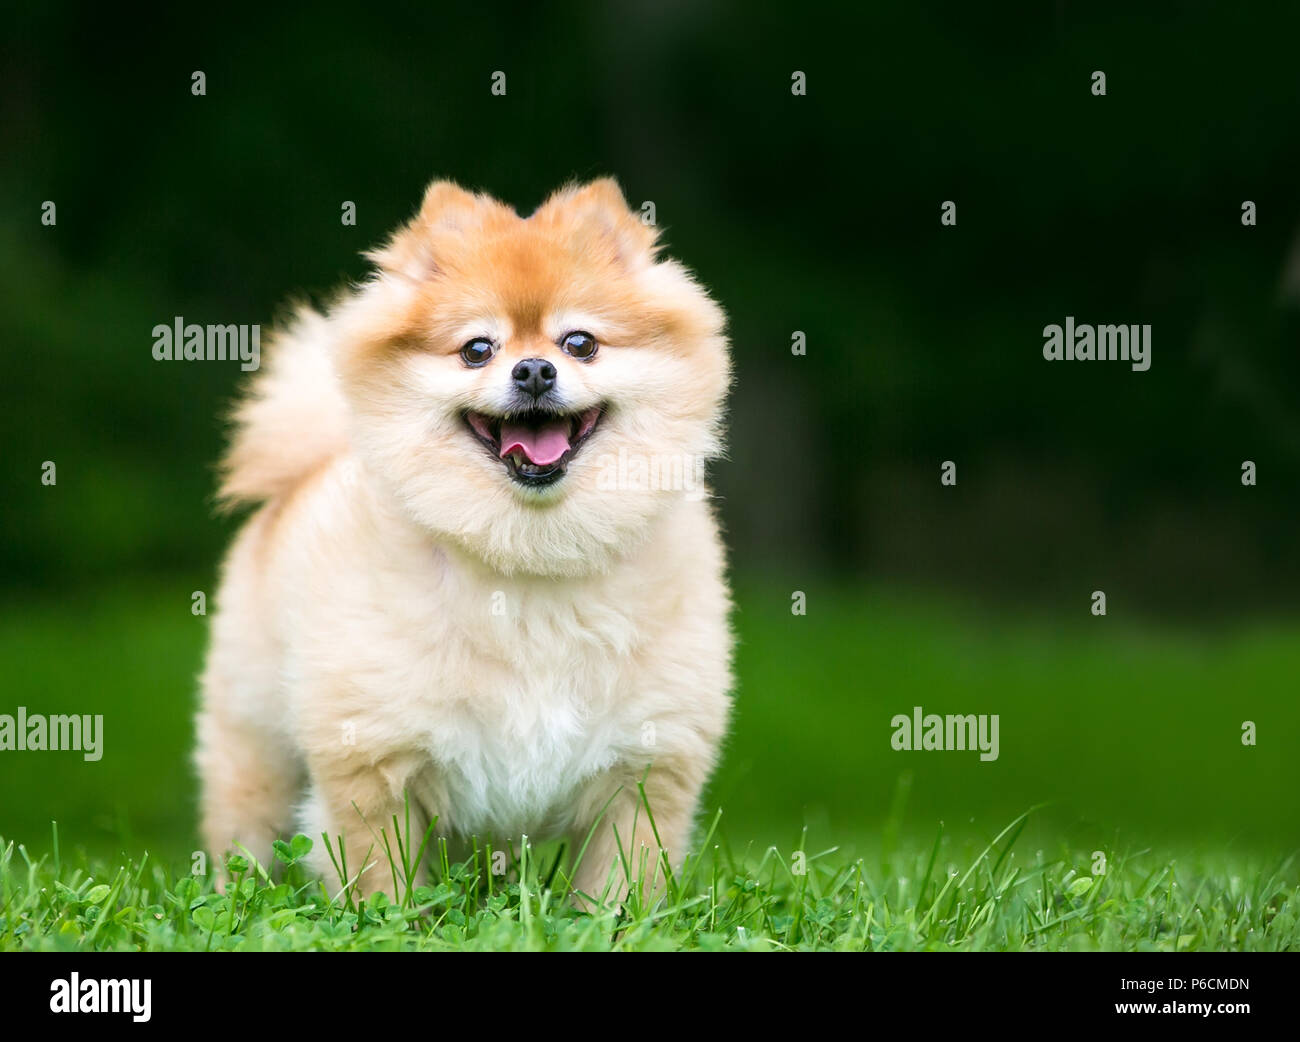 A cute Pomeranian dog with a happy expression Stock Photo